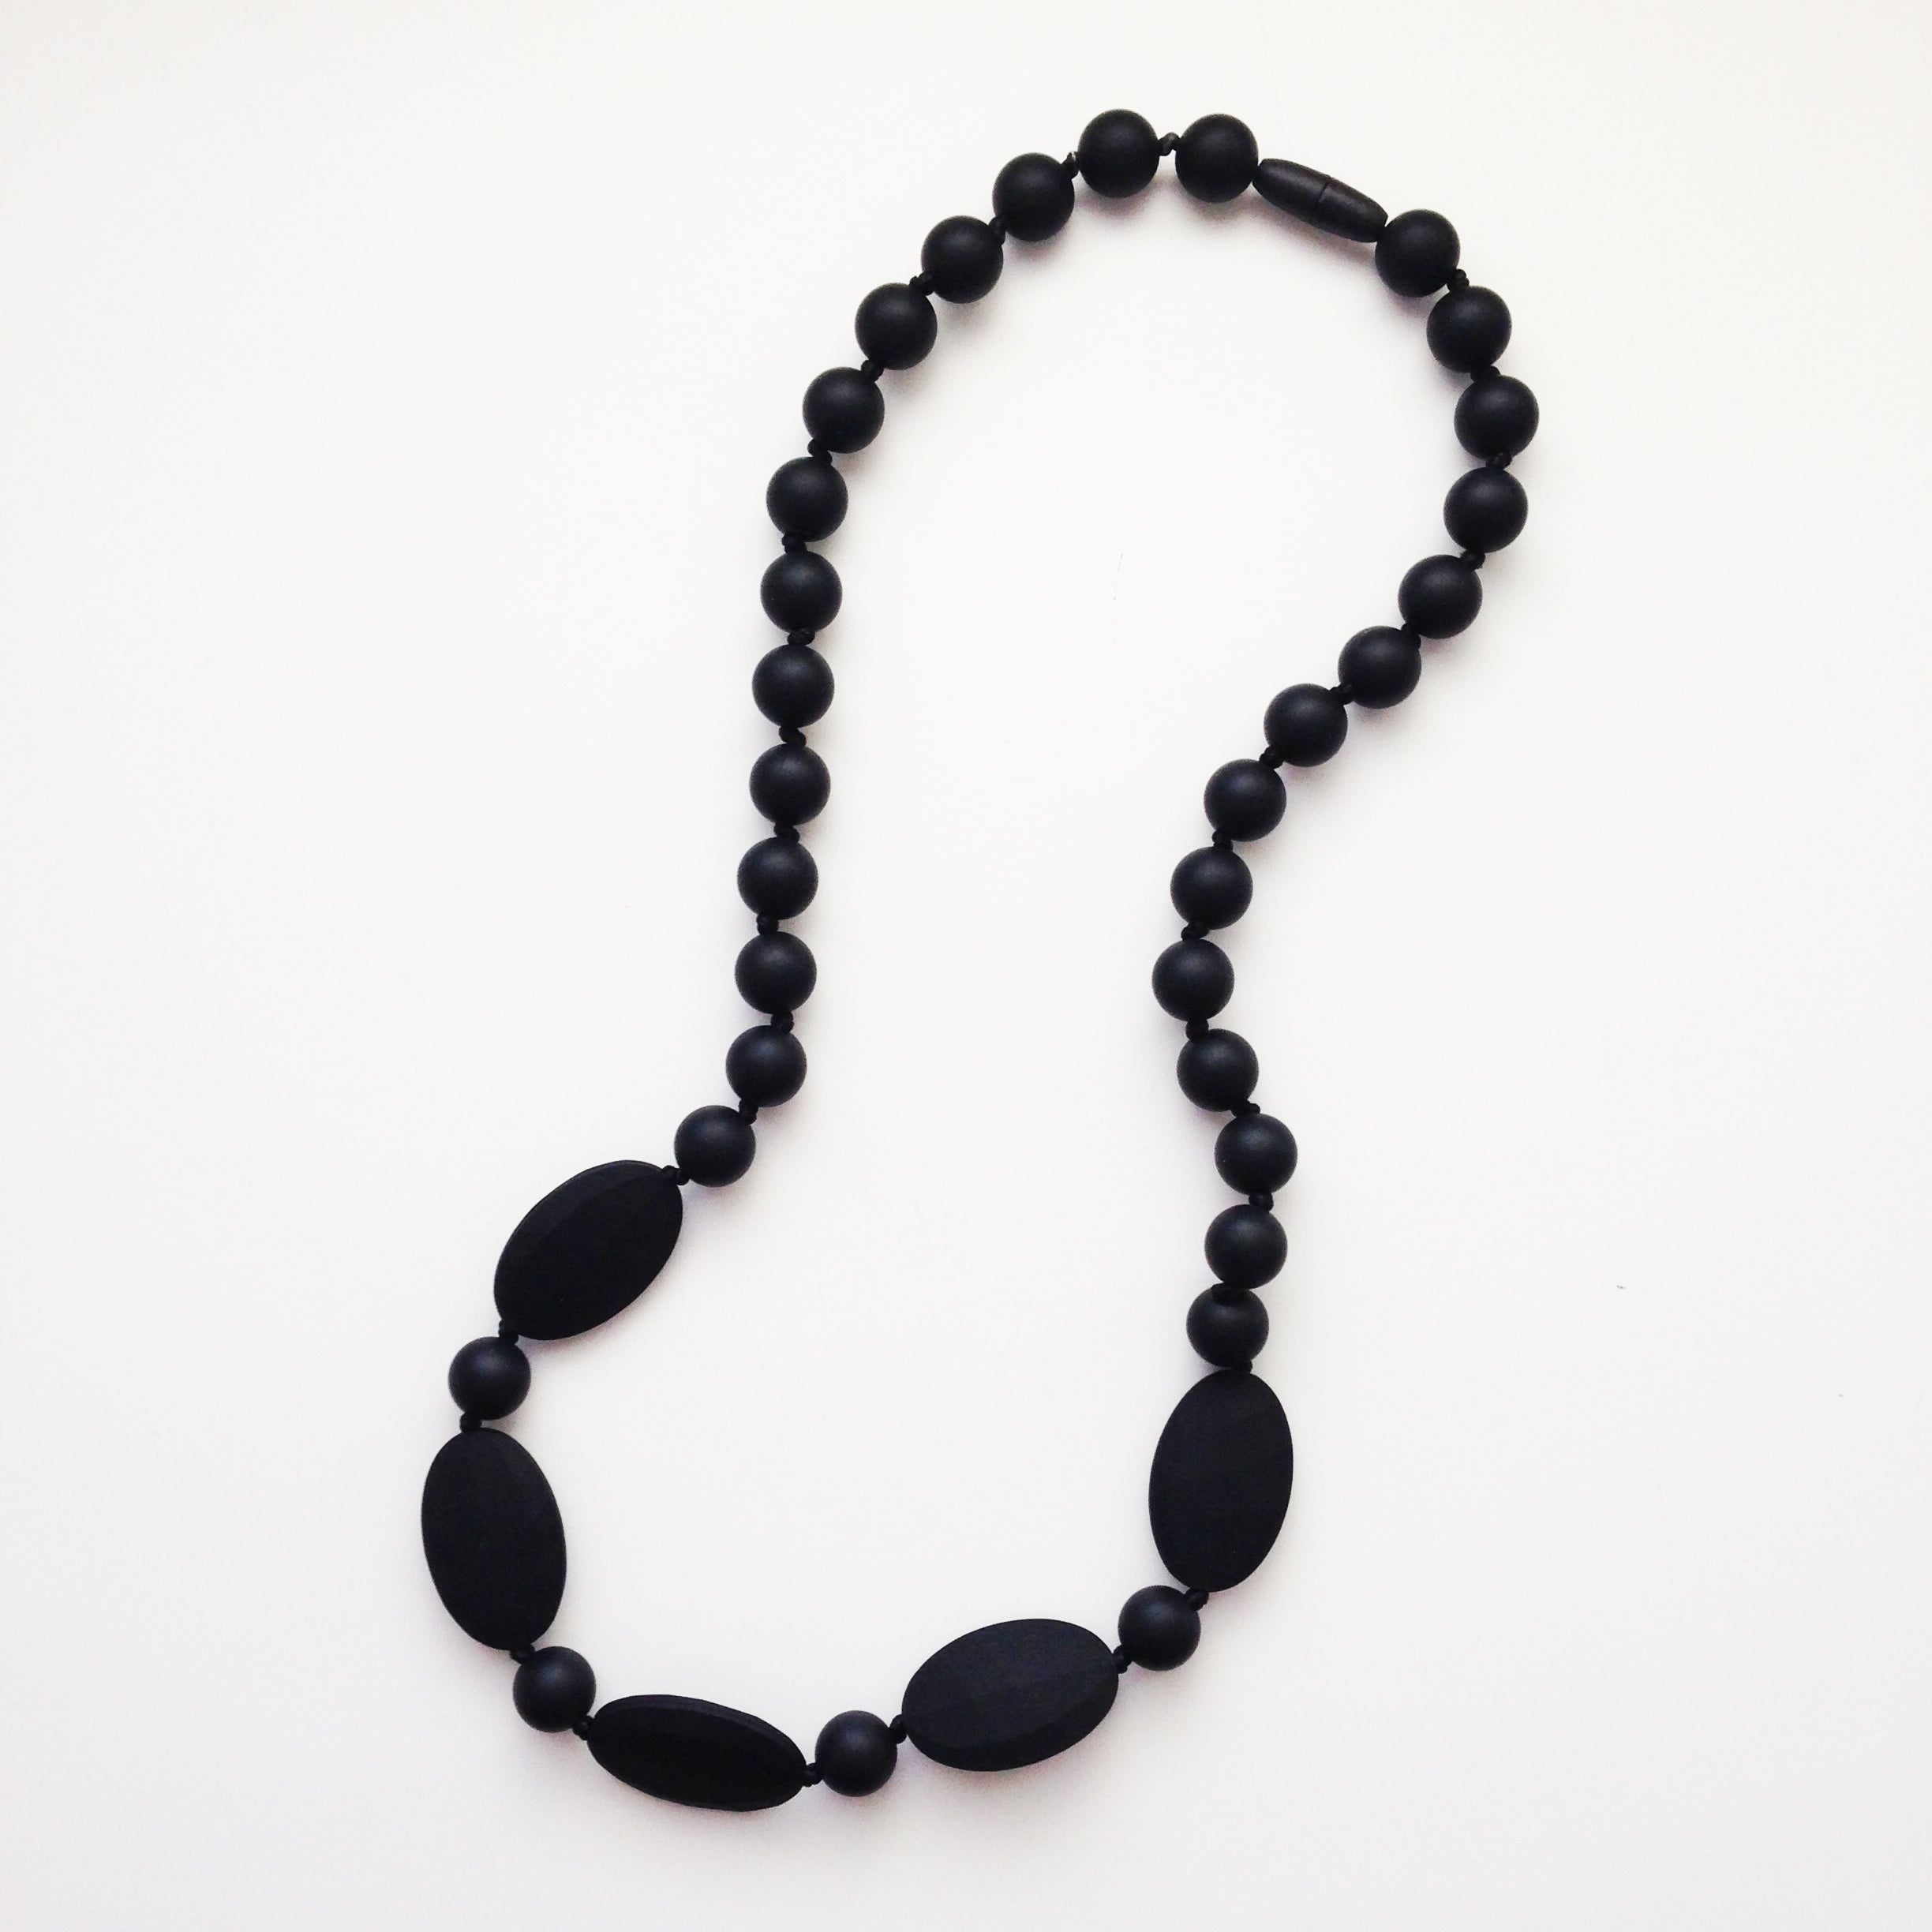 silicone bead necklace for teething